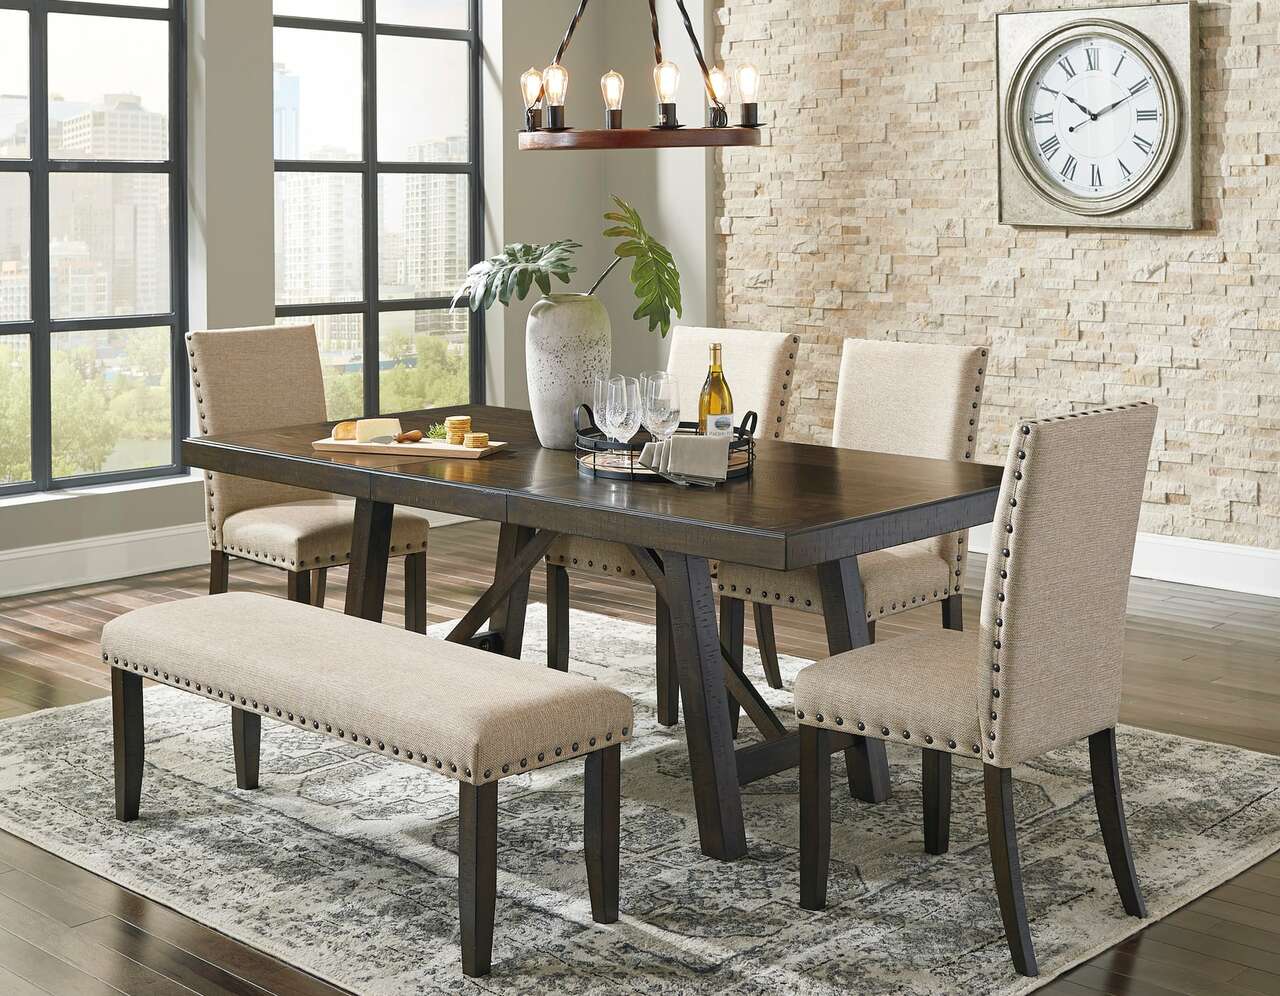  397 Rokane Table, 4  Side Chairs, & 1 Upholstered Bench $995.99